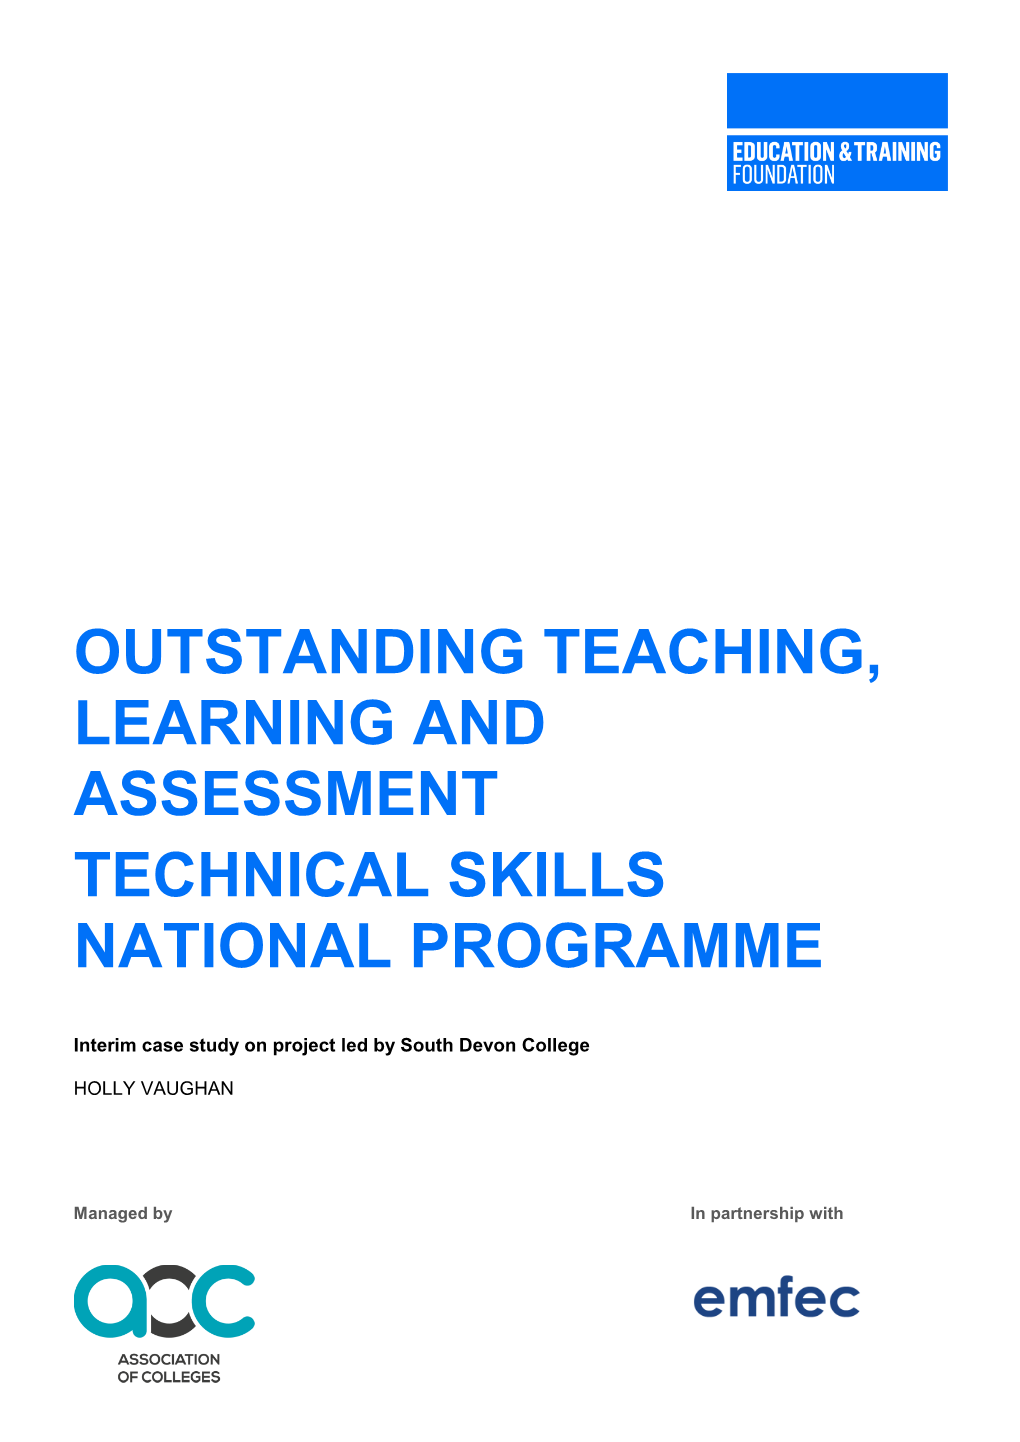 Outstanding Teaching, Learning and Assessment Technical Skills National Programme